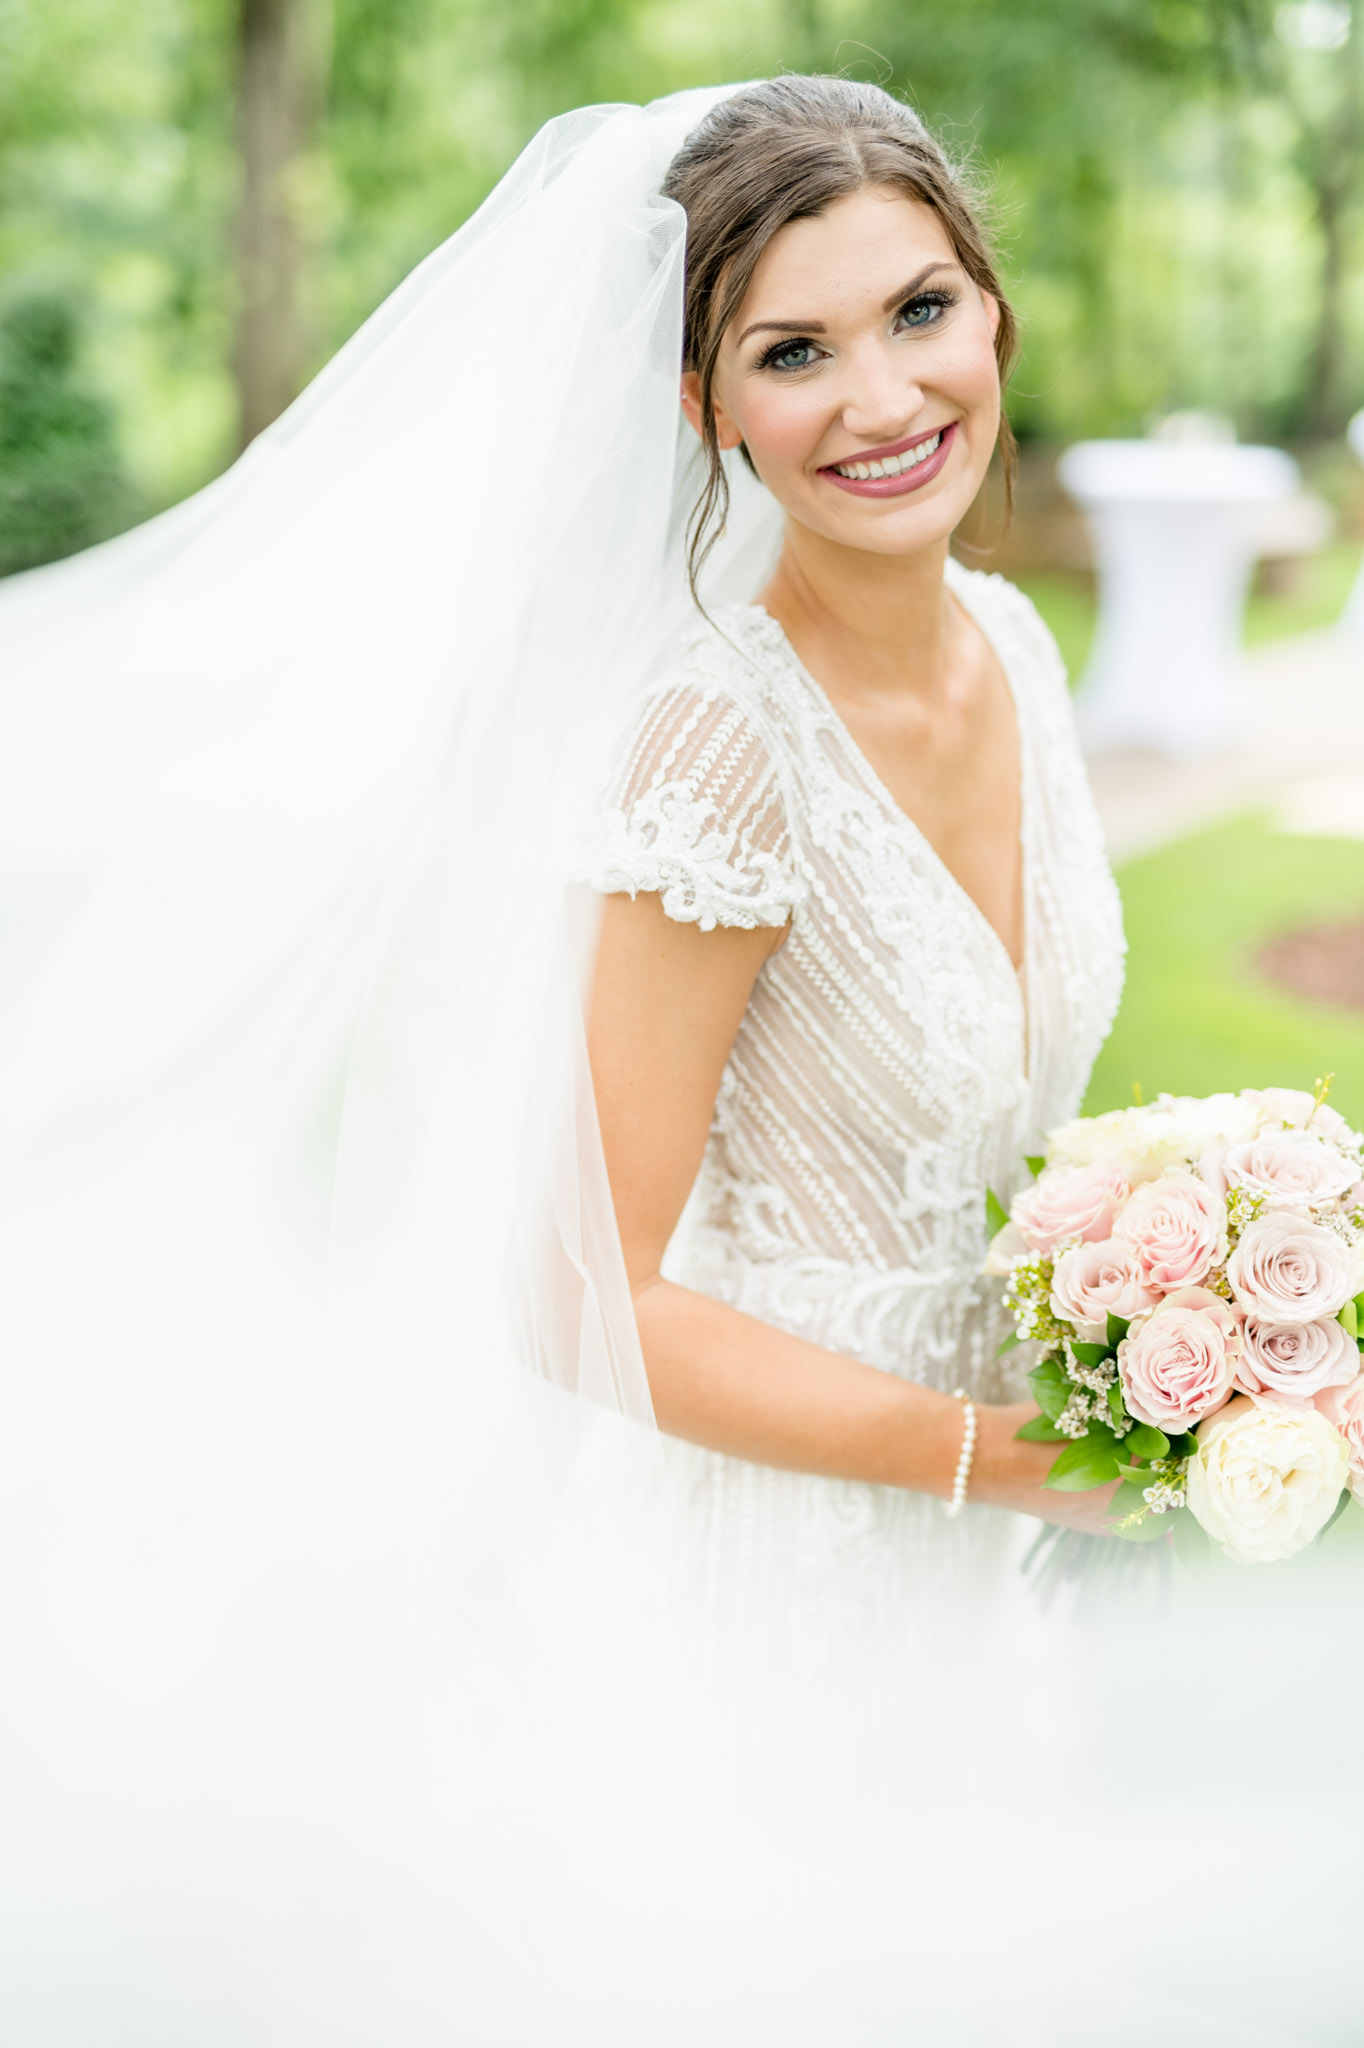 Bride smiles at camera while veil blows in wind.